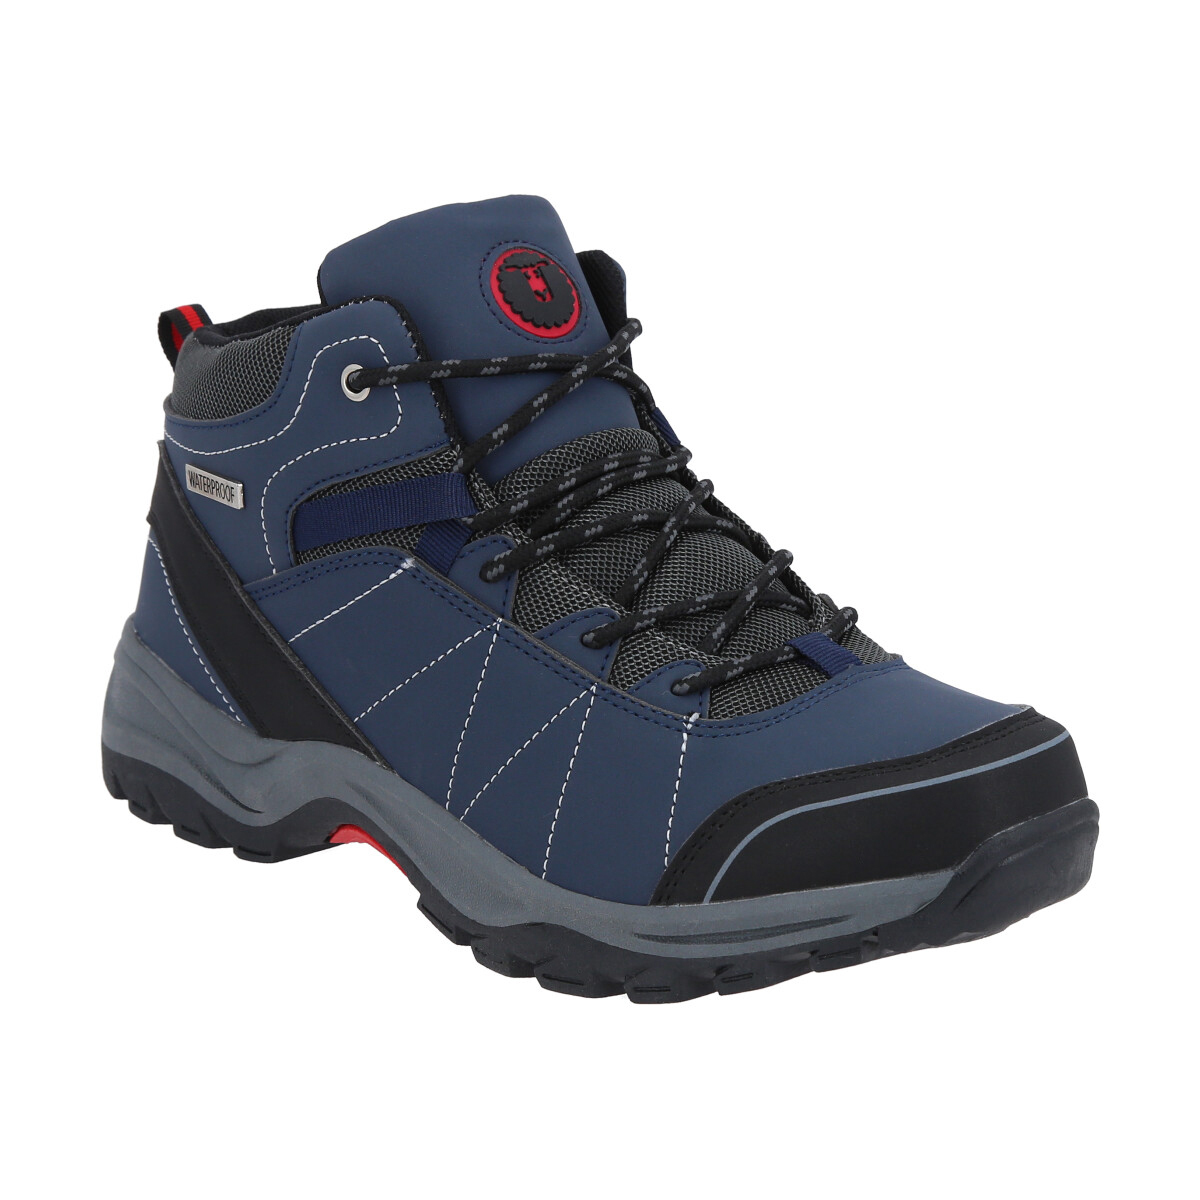 ZAPATO OUTDOOR  IMPERMEABLE